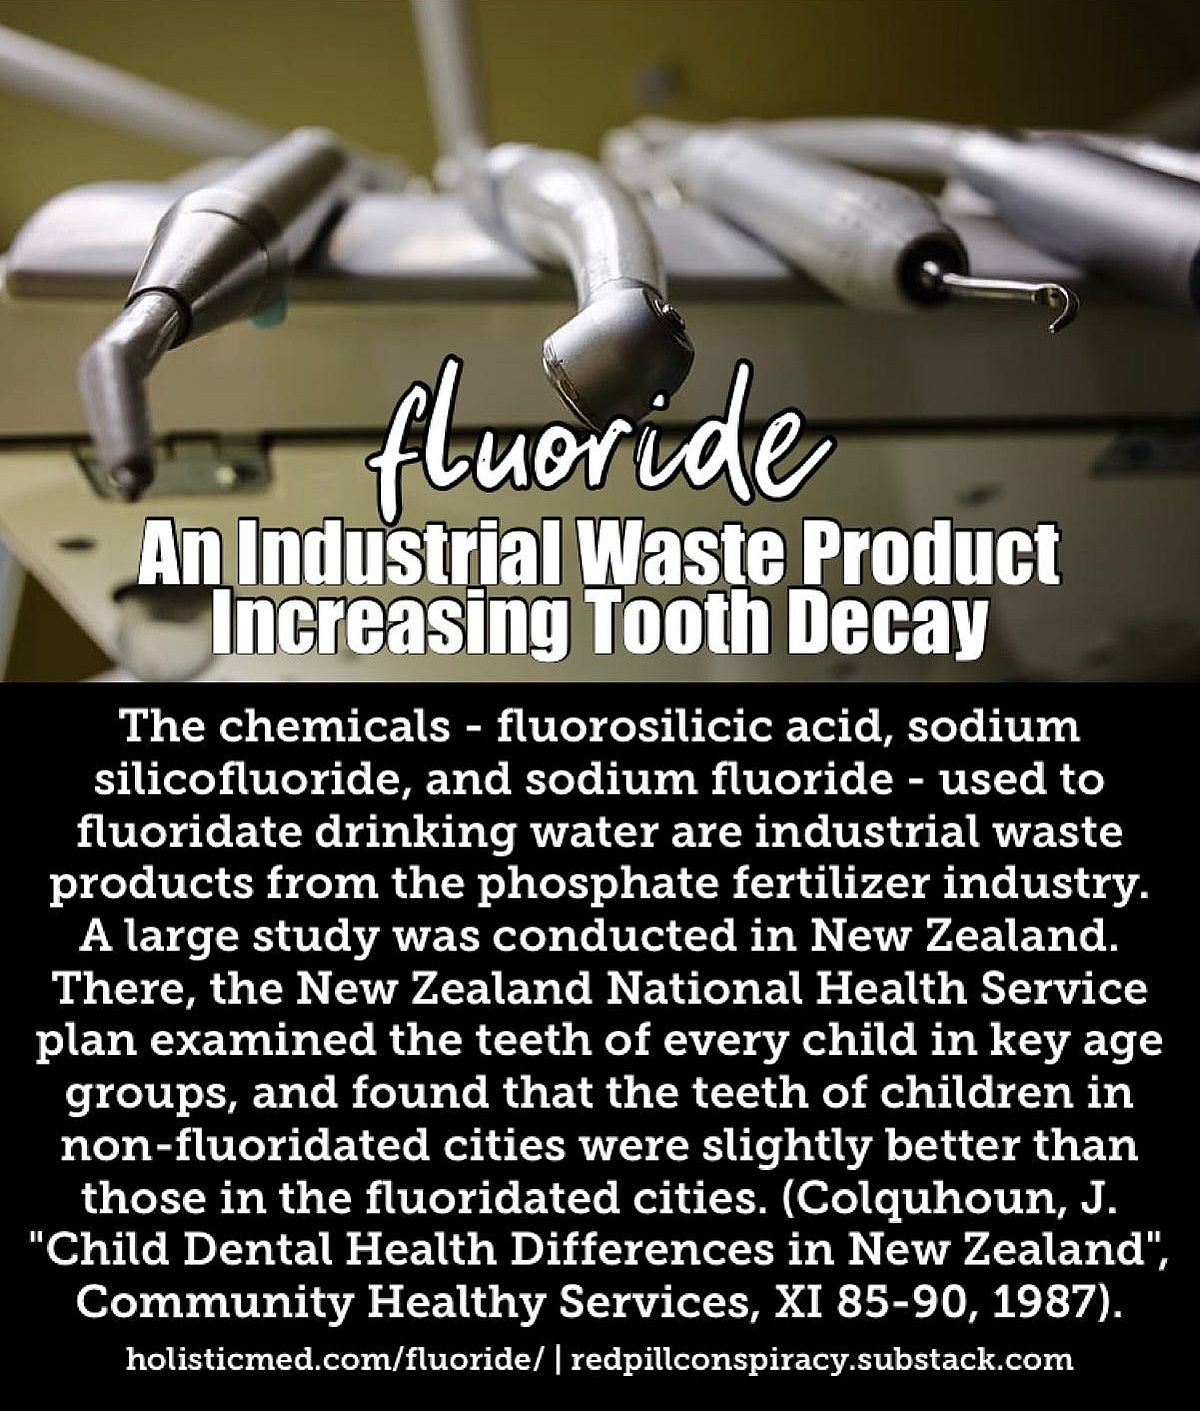 Fluoride - an industrial waste product that promotes tooth decay